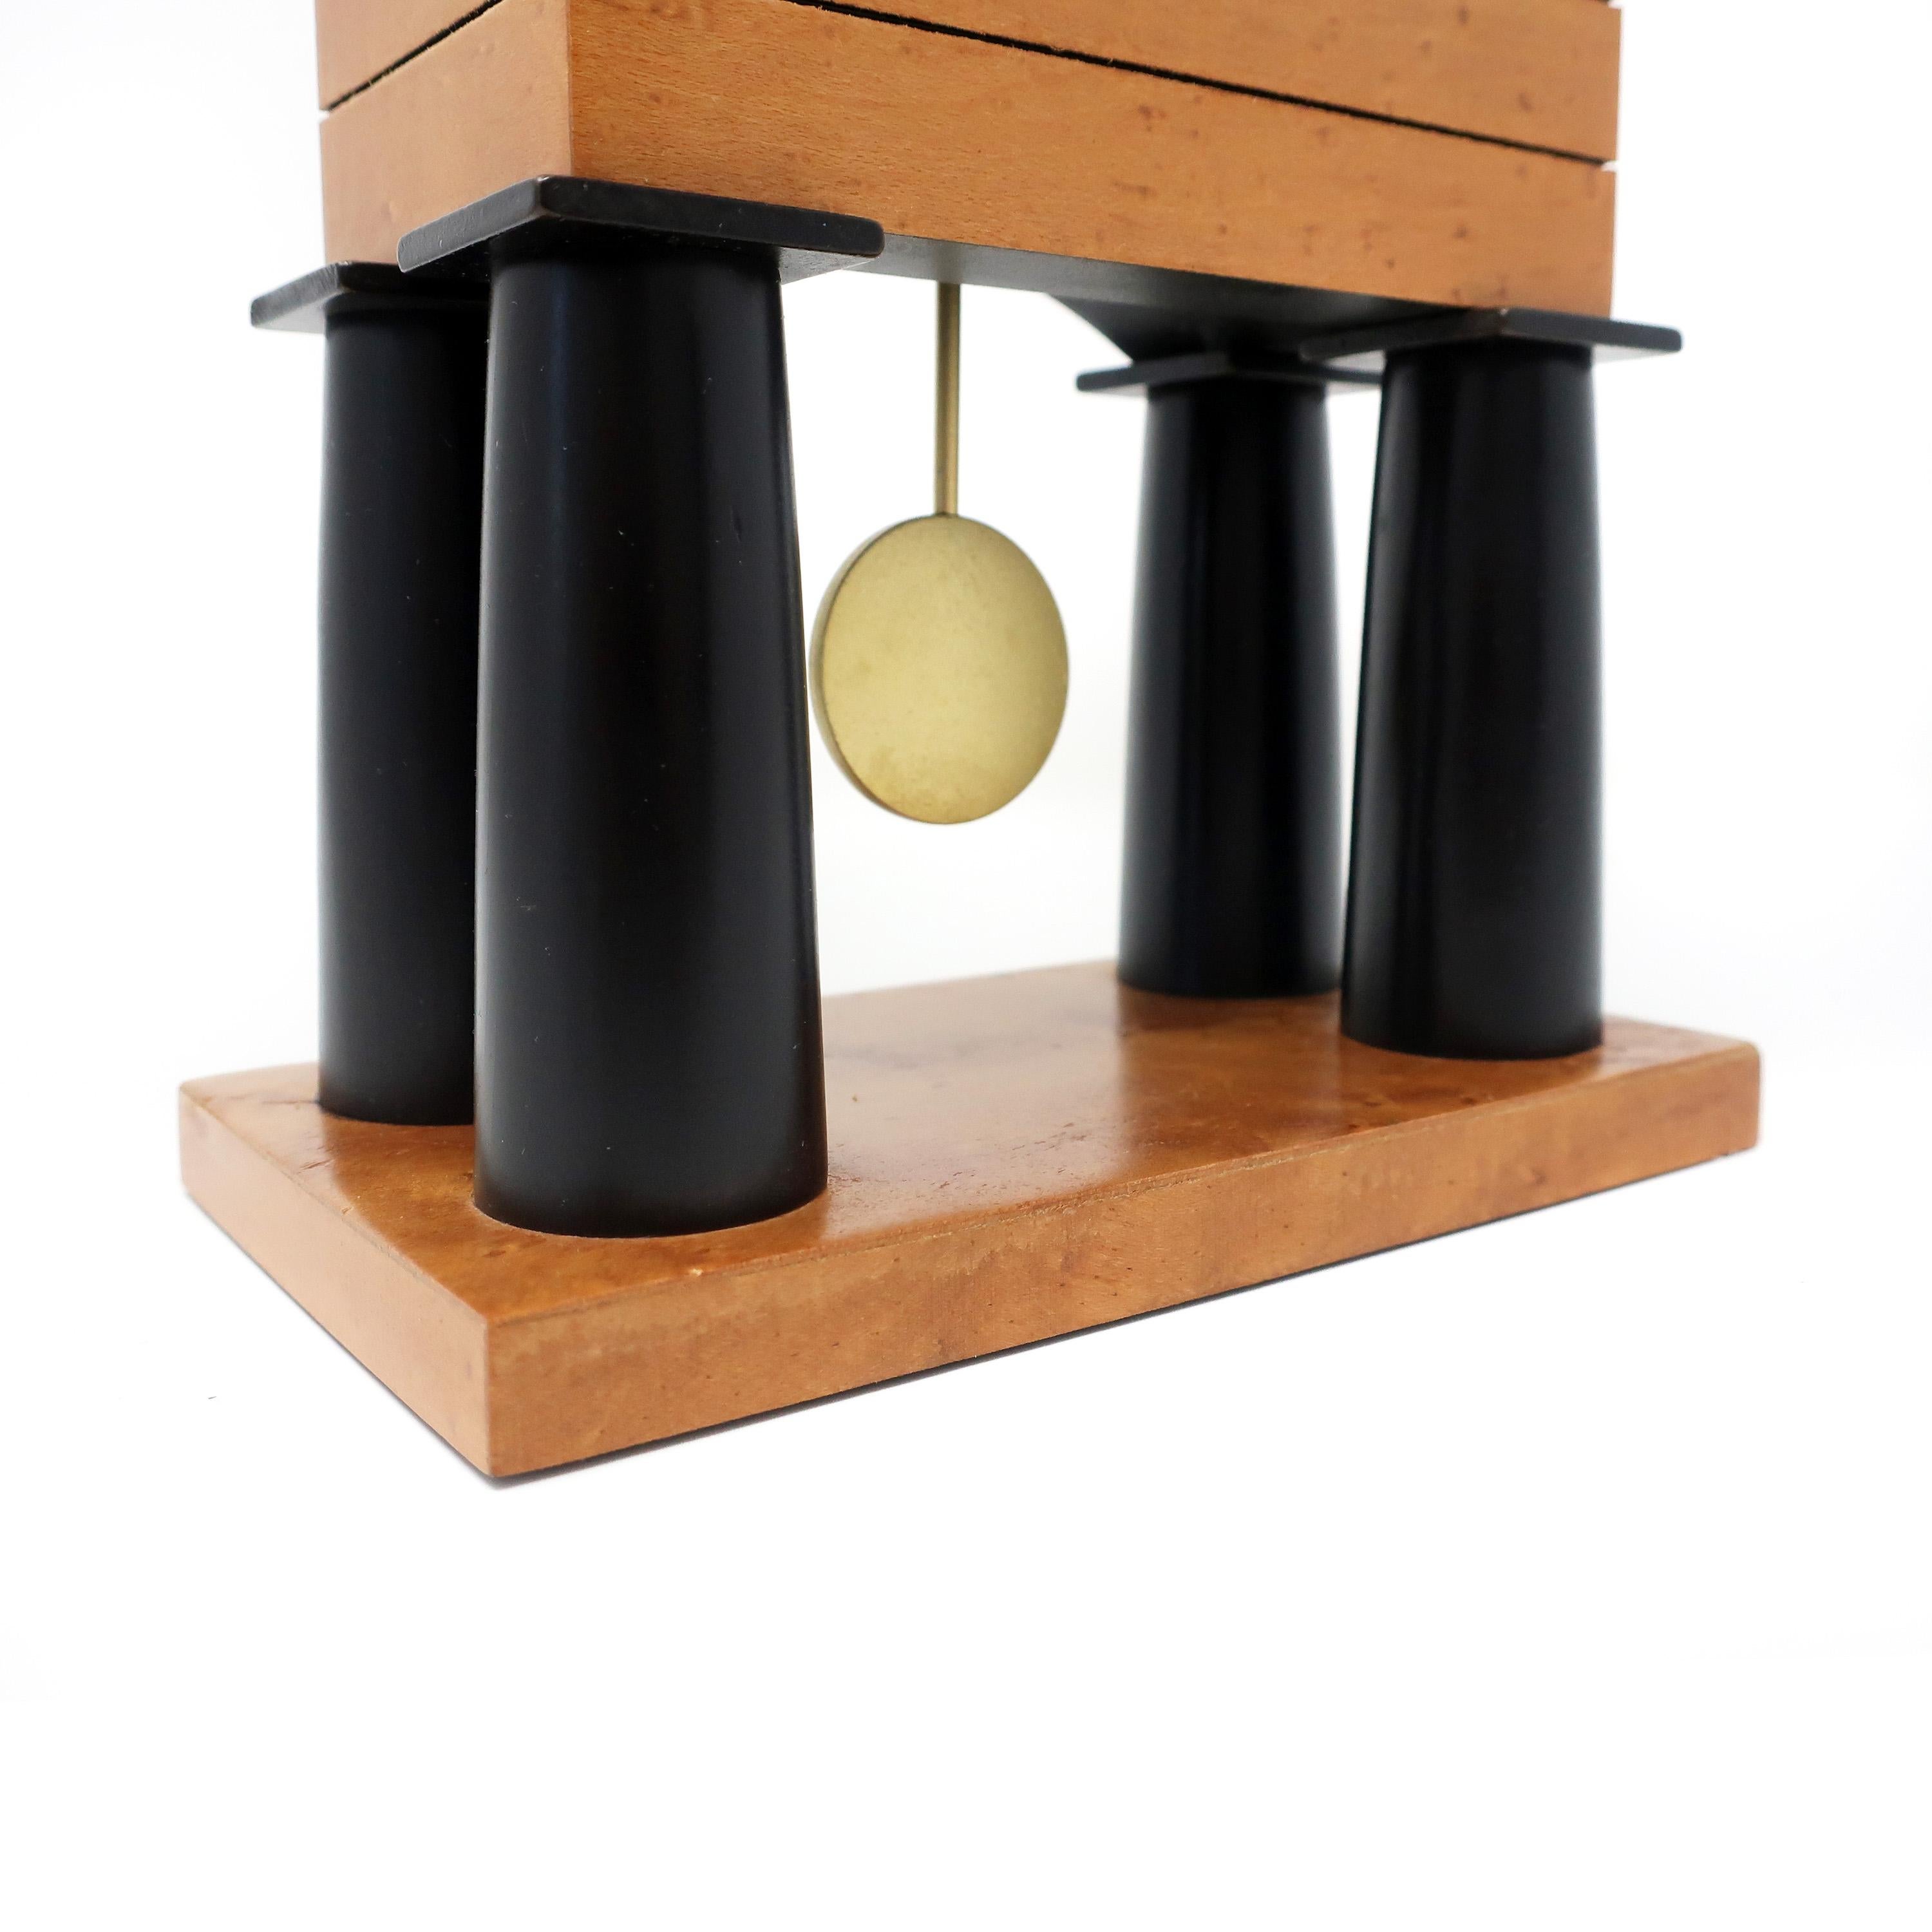 Italian Postmodern Mantle Clock by Michael Graves for Alessi